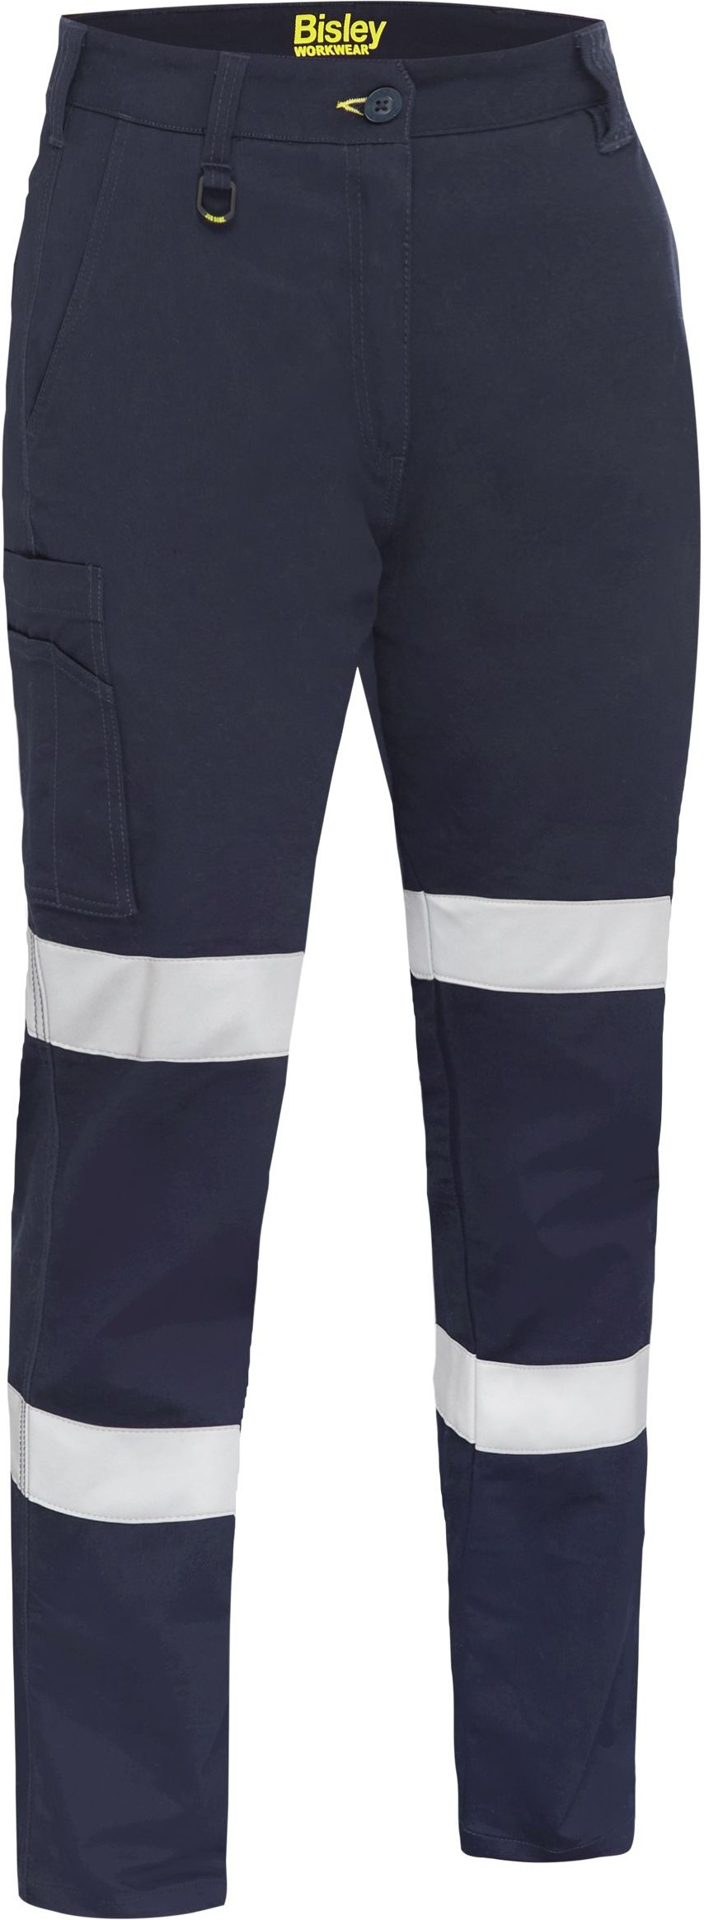 Bisley Workwear Women’s Taped Stretch Cotton Drill Cargo Pants ...